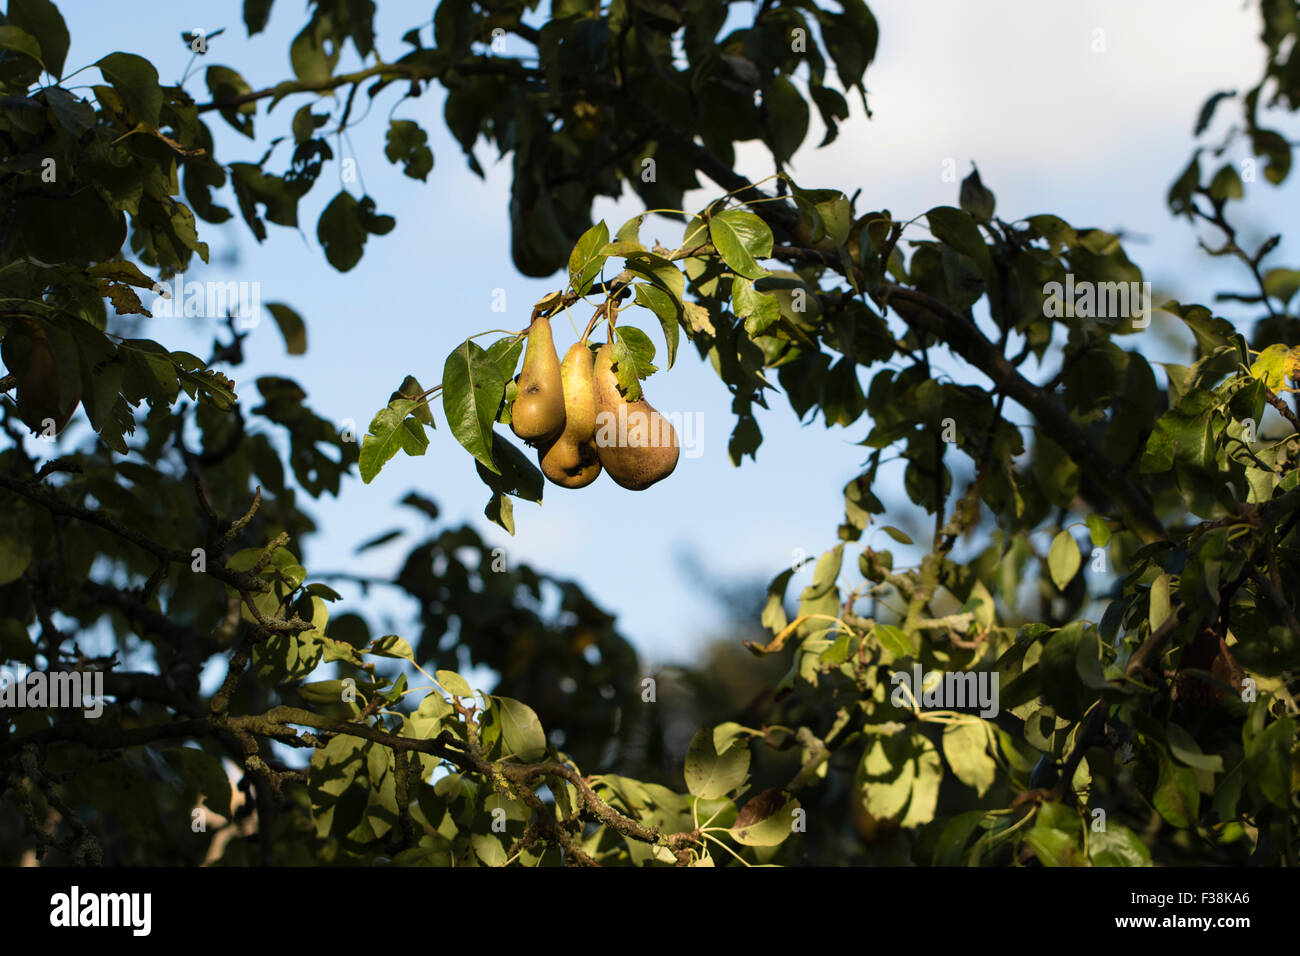 Pears ripening on the tree in the early Autumn sunlight, Kent, England Stock Photo